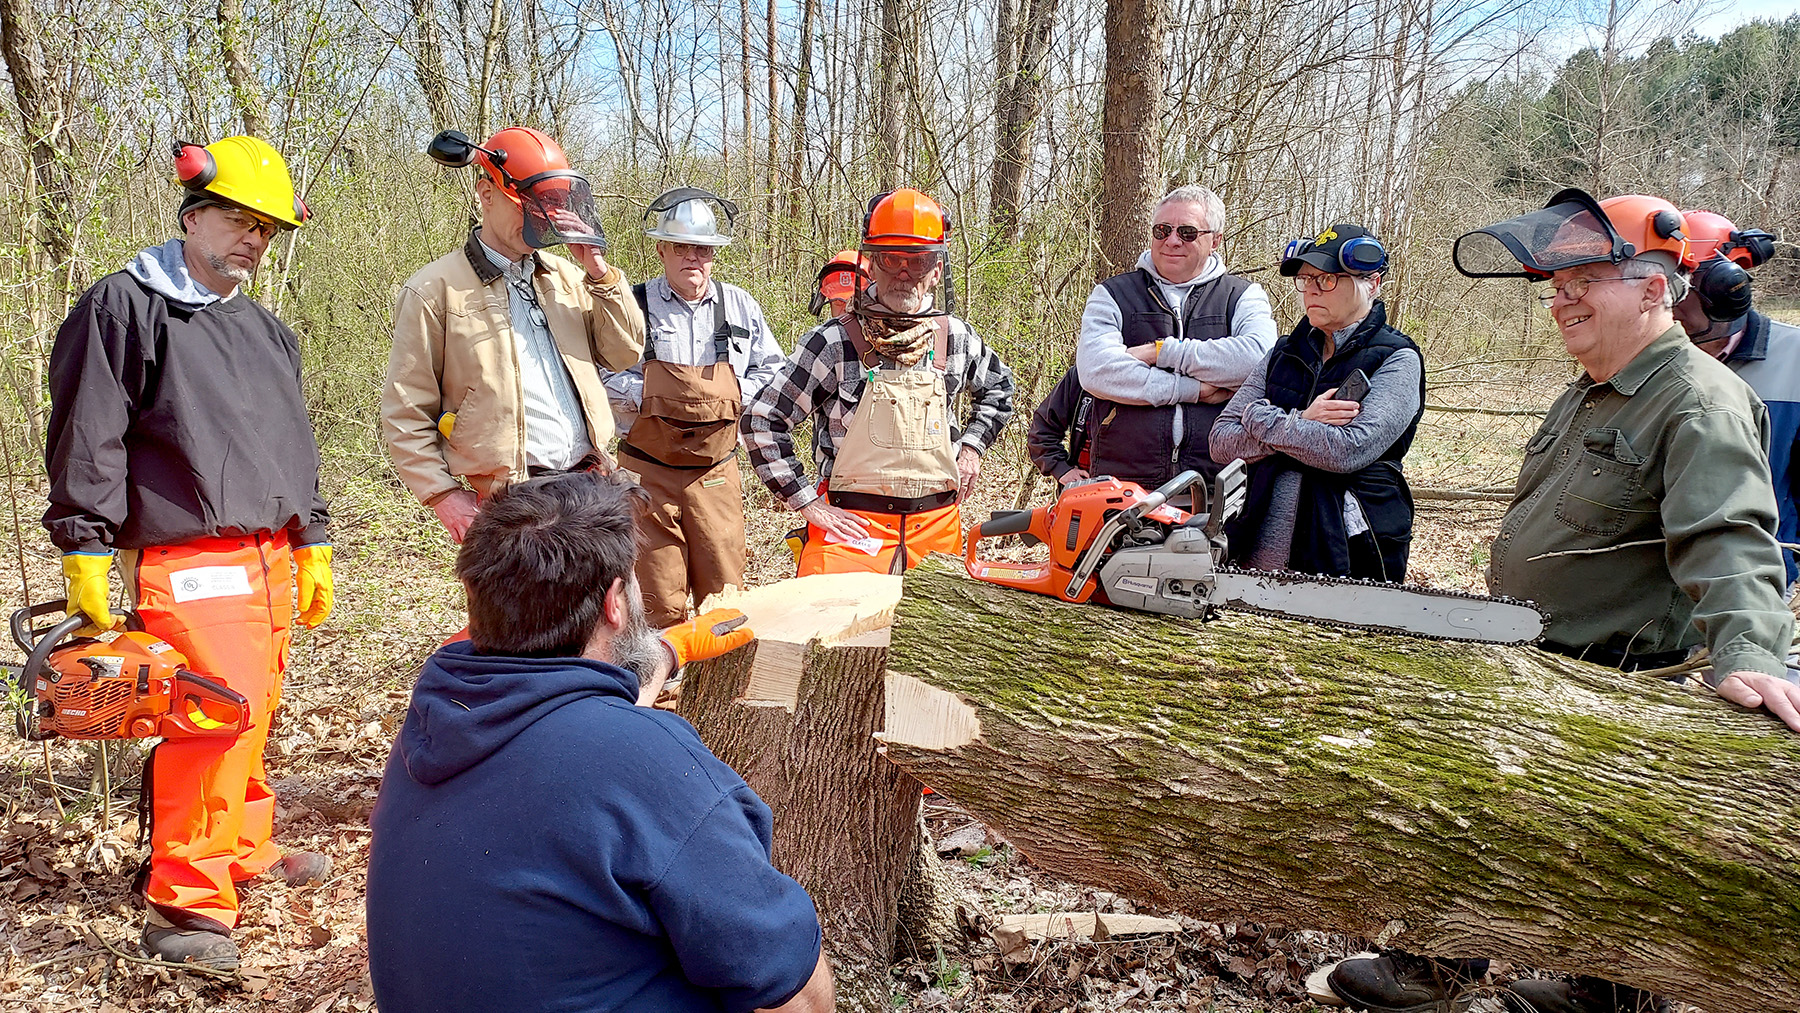 Evans teaching landowners about the safe use of chainsaws. Photo by Taryn Bieri, University of Illinois